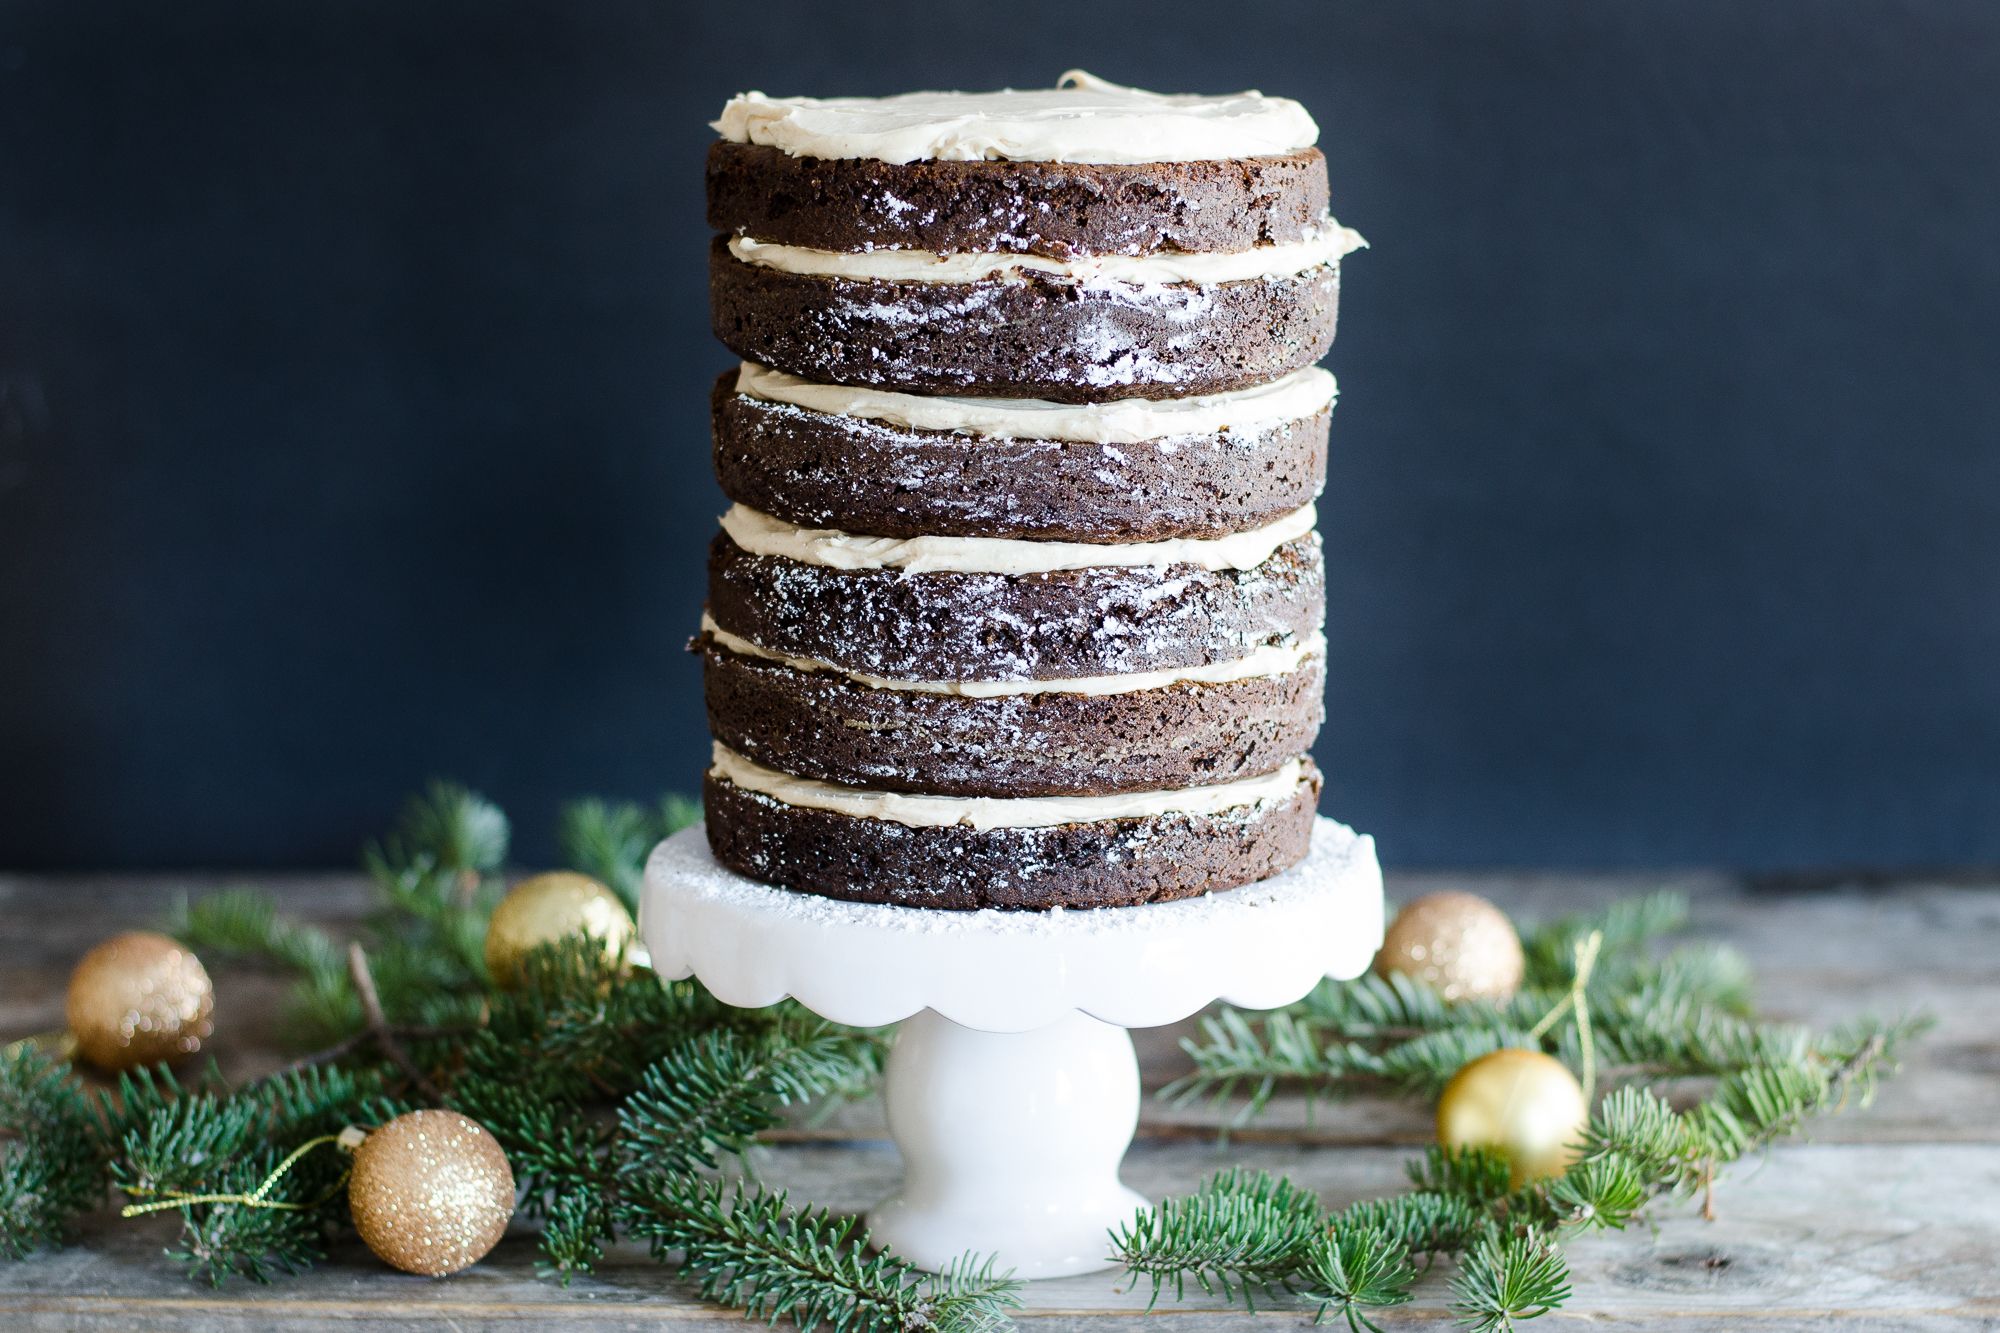 https://hips.hearstapps.com/thepioneerwoman/wp-content/uploads/2015/12/gingerbread-layer-cake-with-cinnamon-cream-cheese-frosting-01.jpg